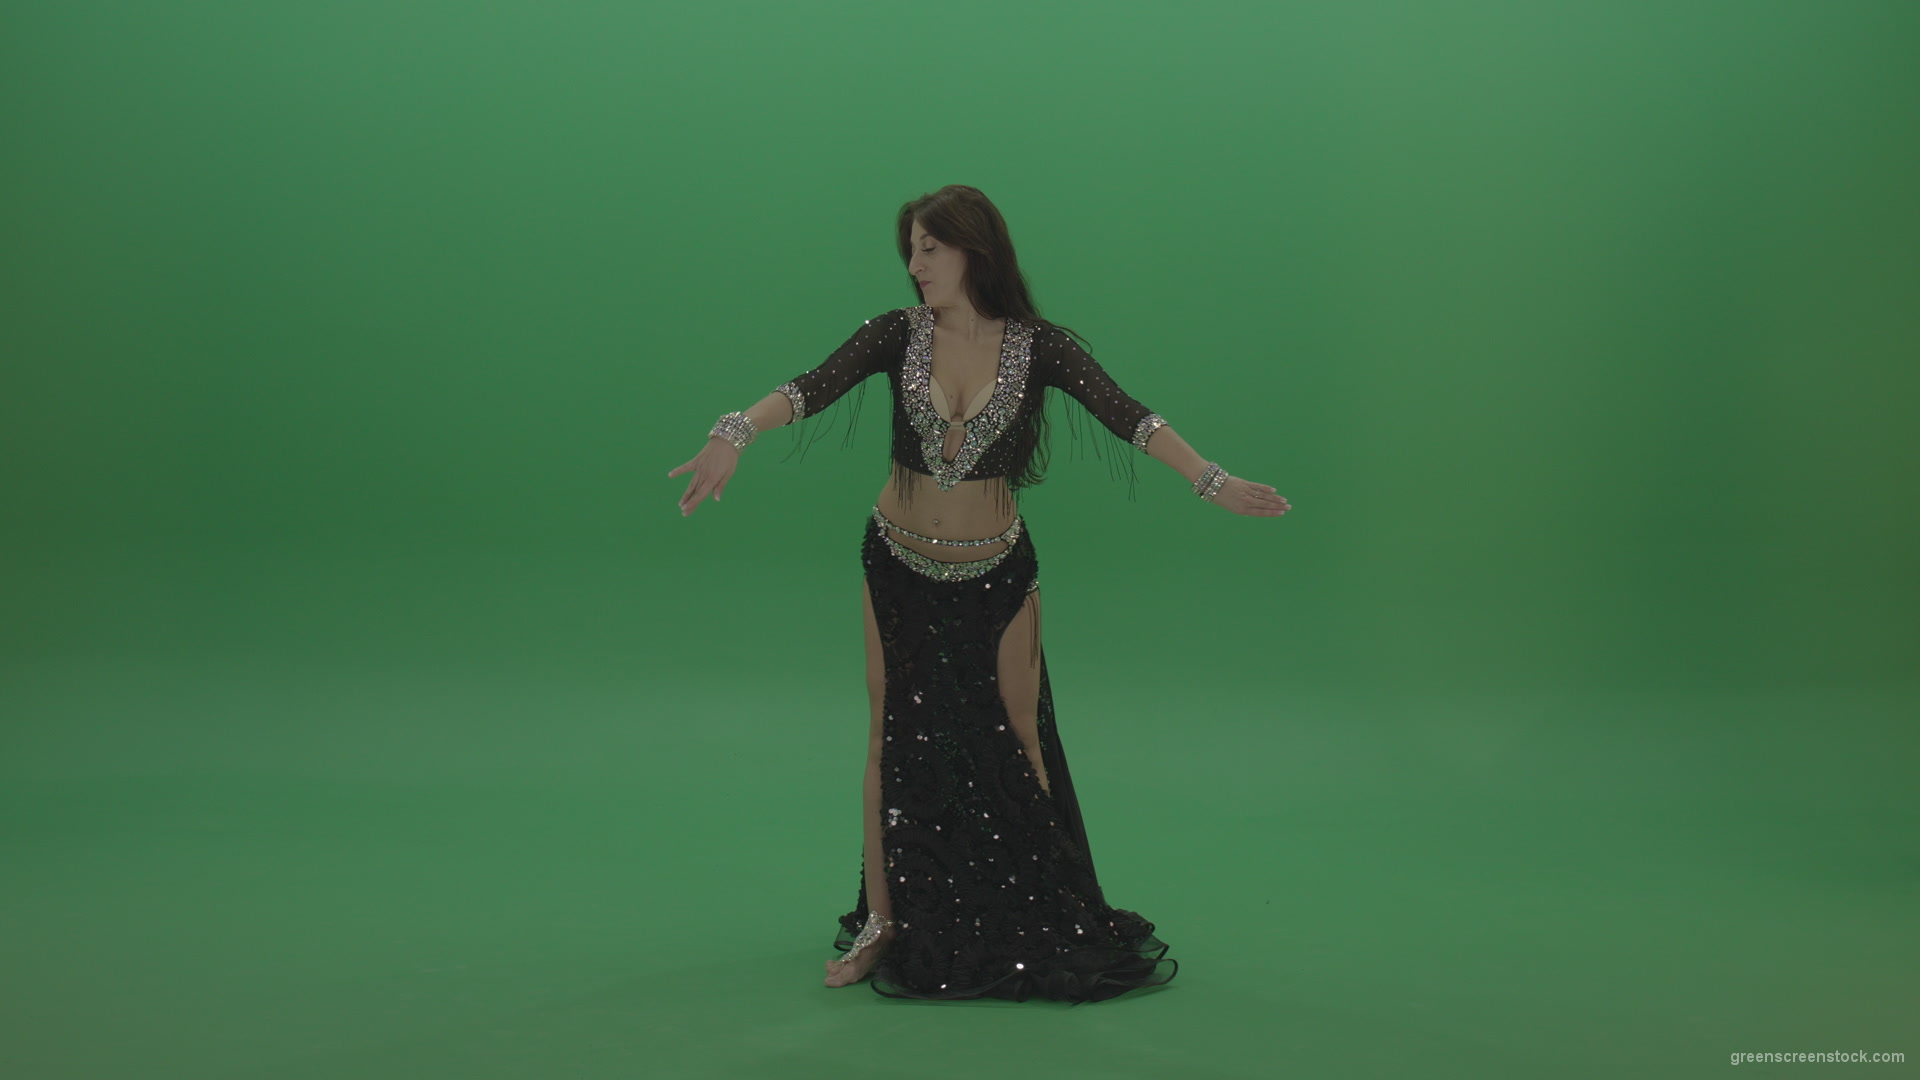 Admirable-belly-dancer-in-black-wear-display-amazing-dance-moves-over-chromakey-background_002 Green Screen Stock